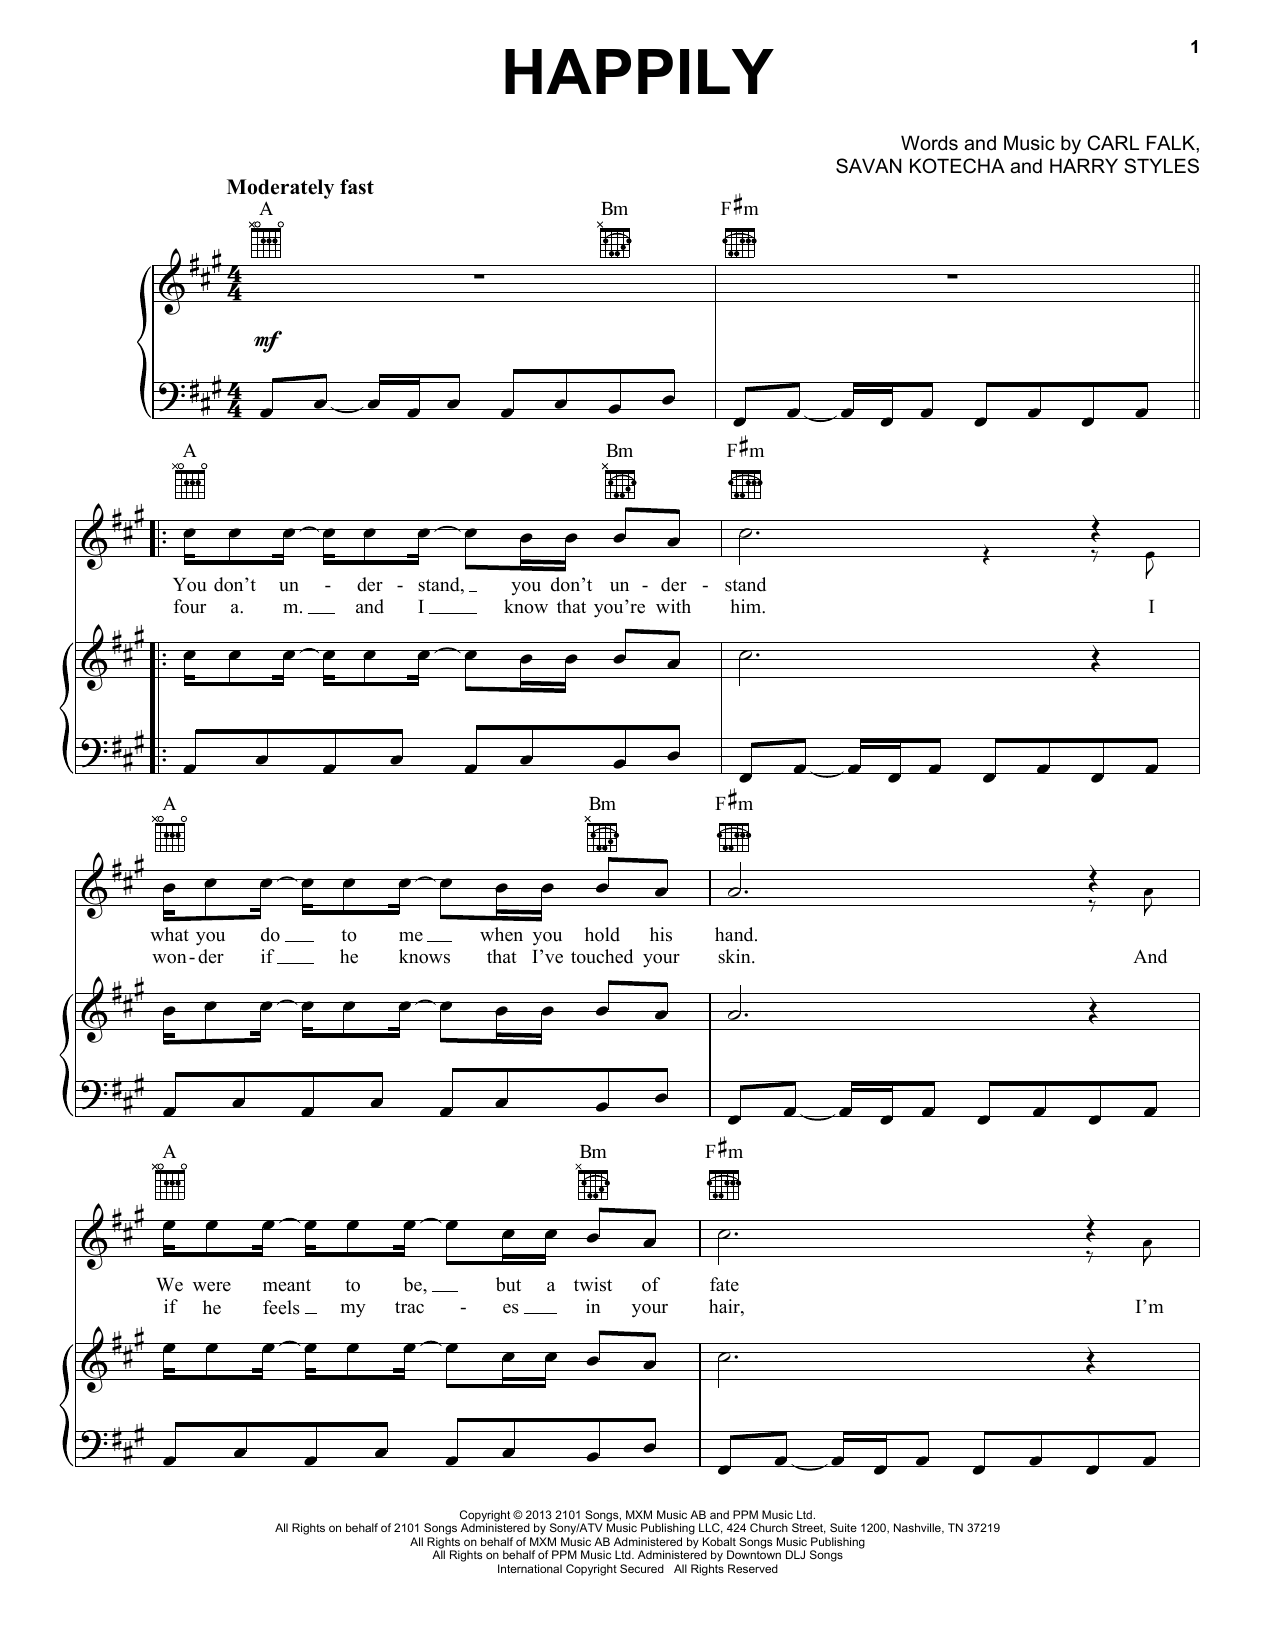 Download One Direction Happily Sheet Music